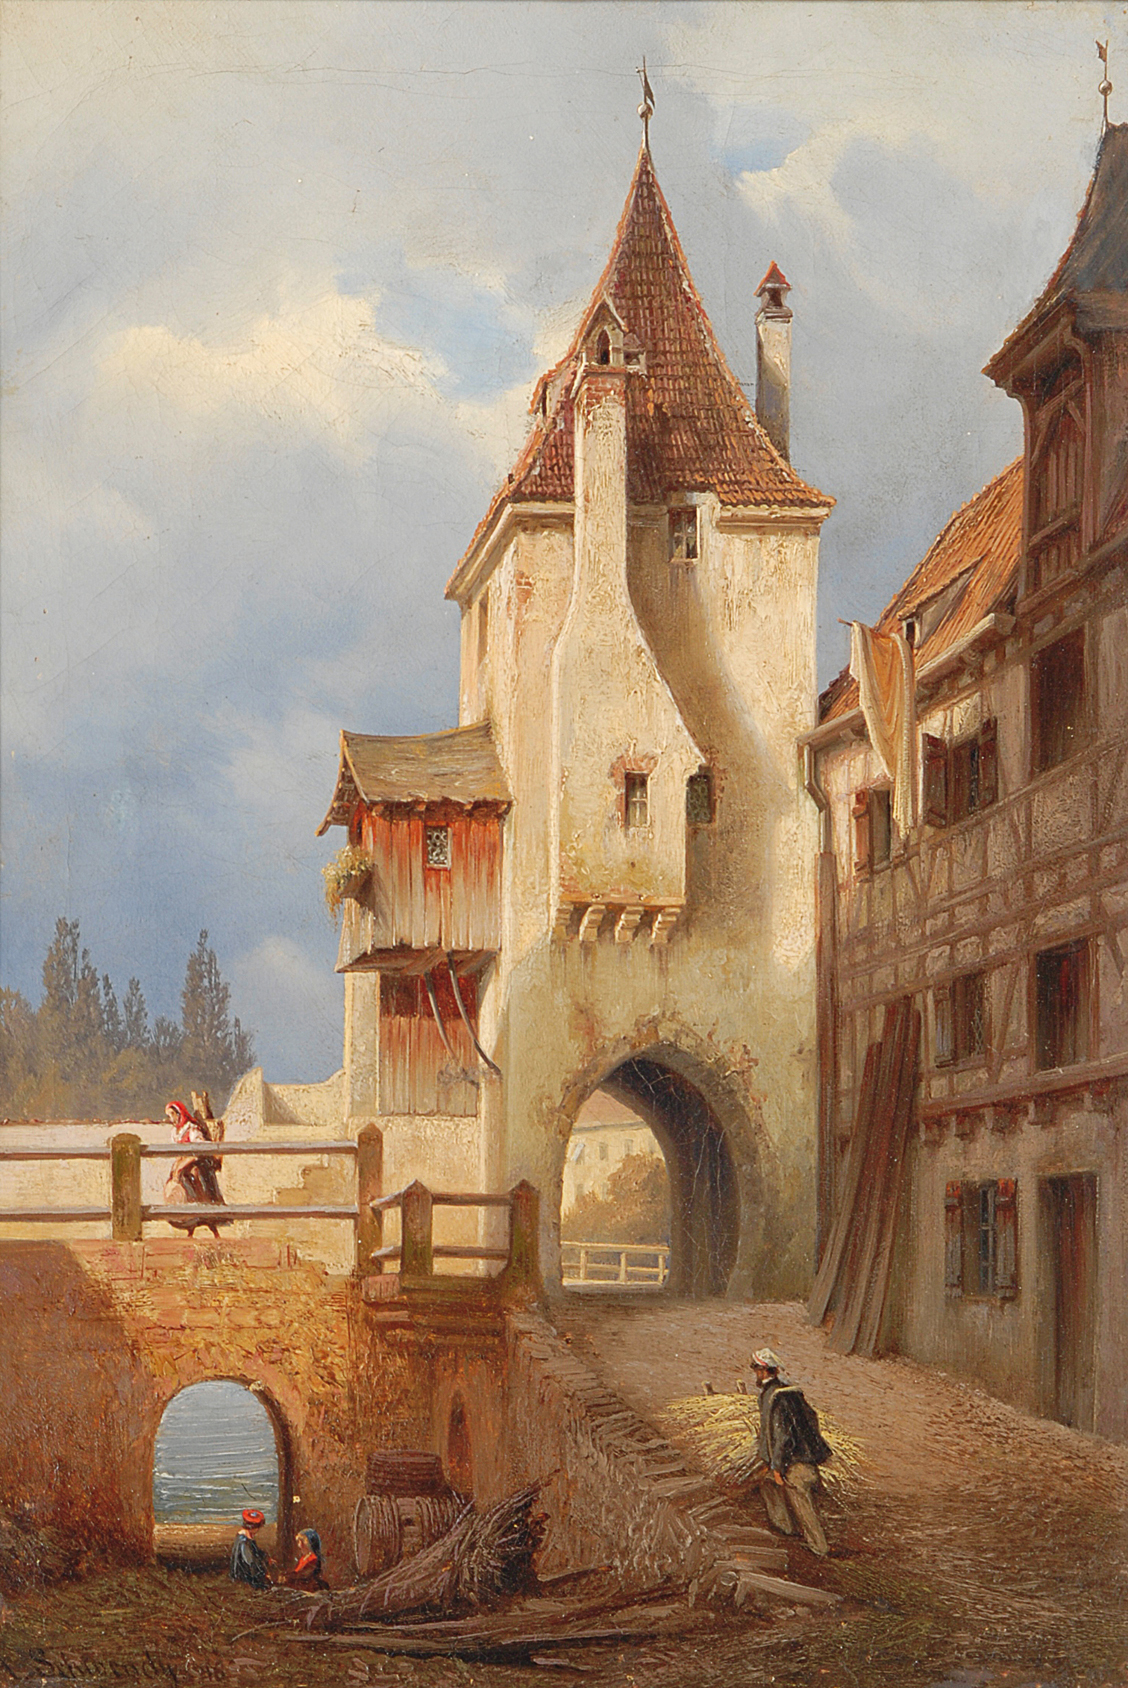 At the town gate